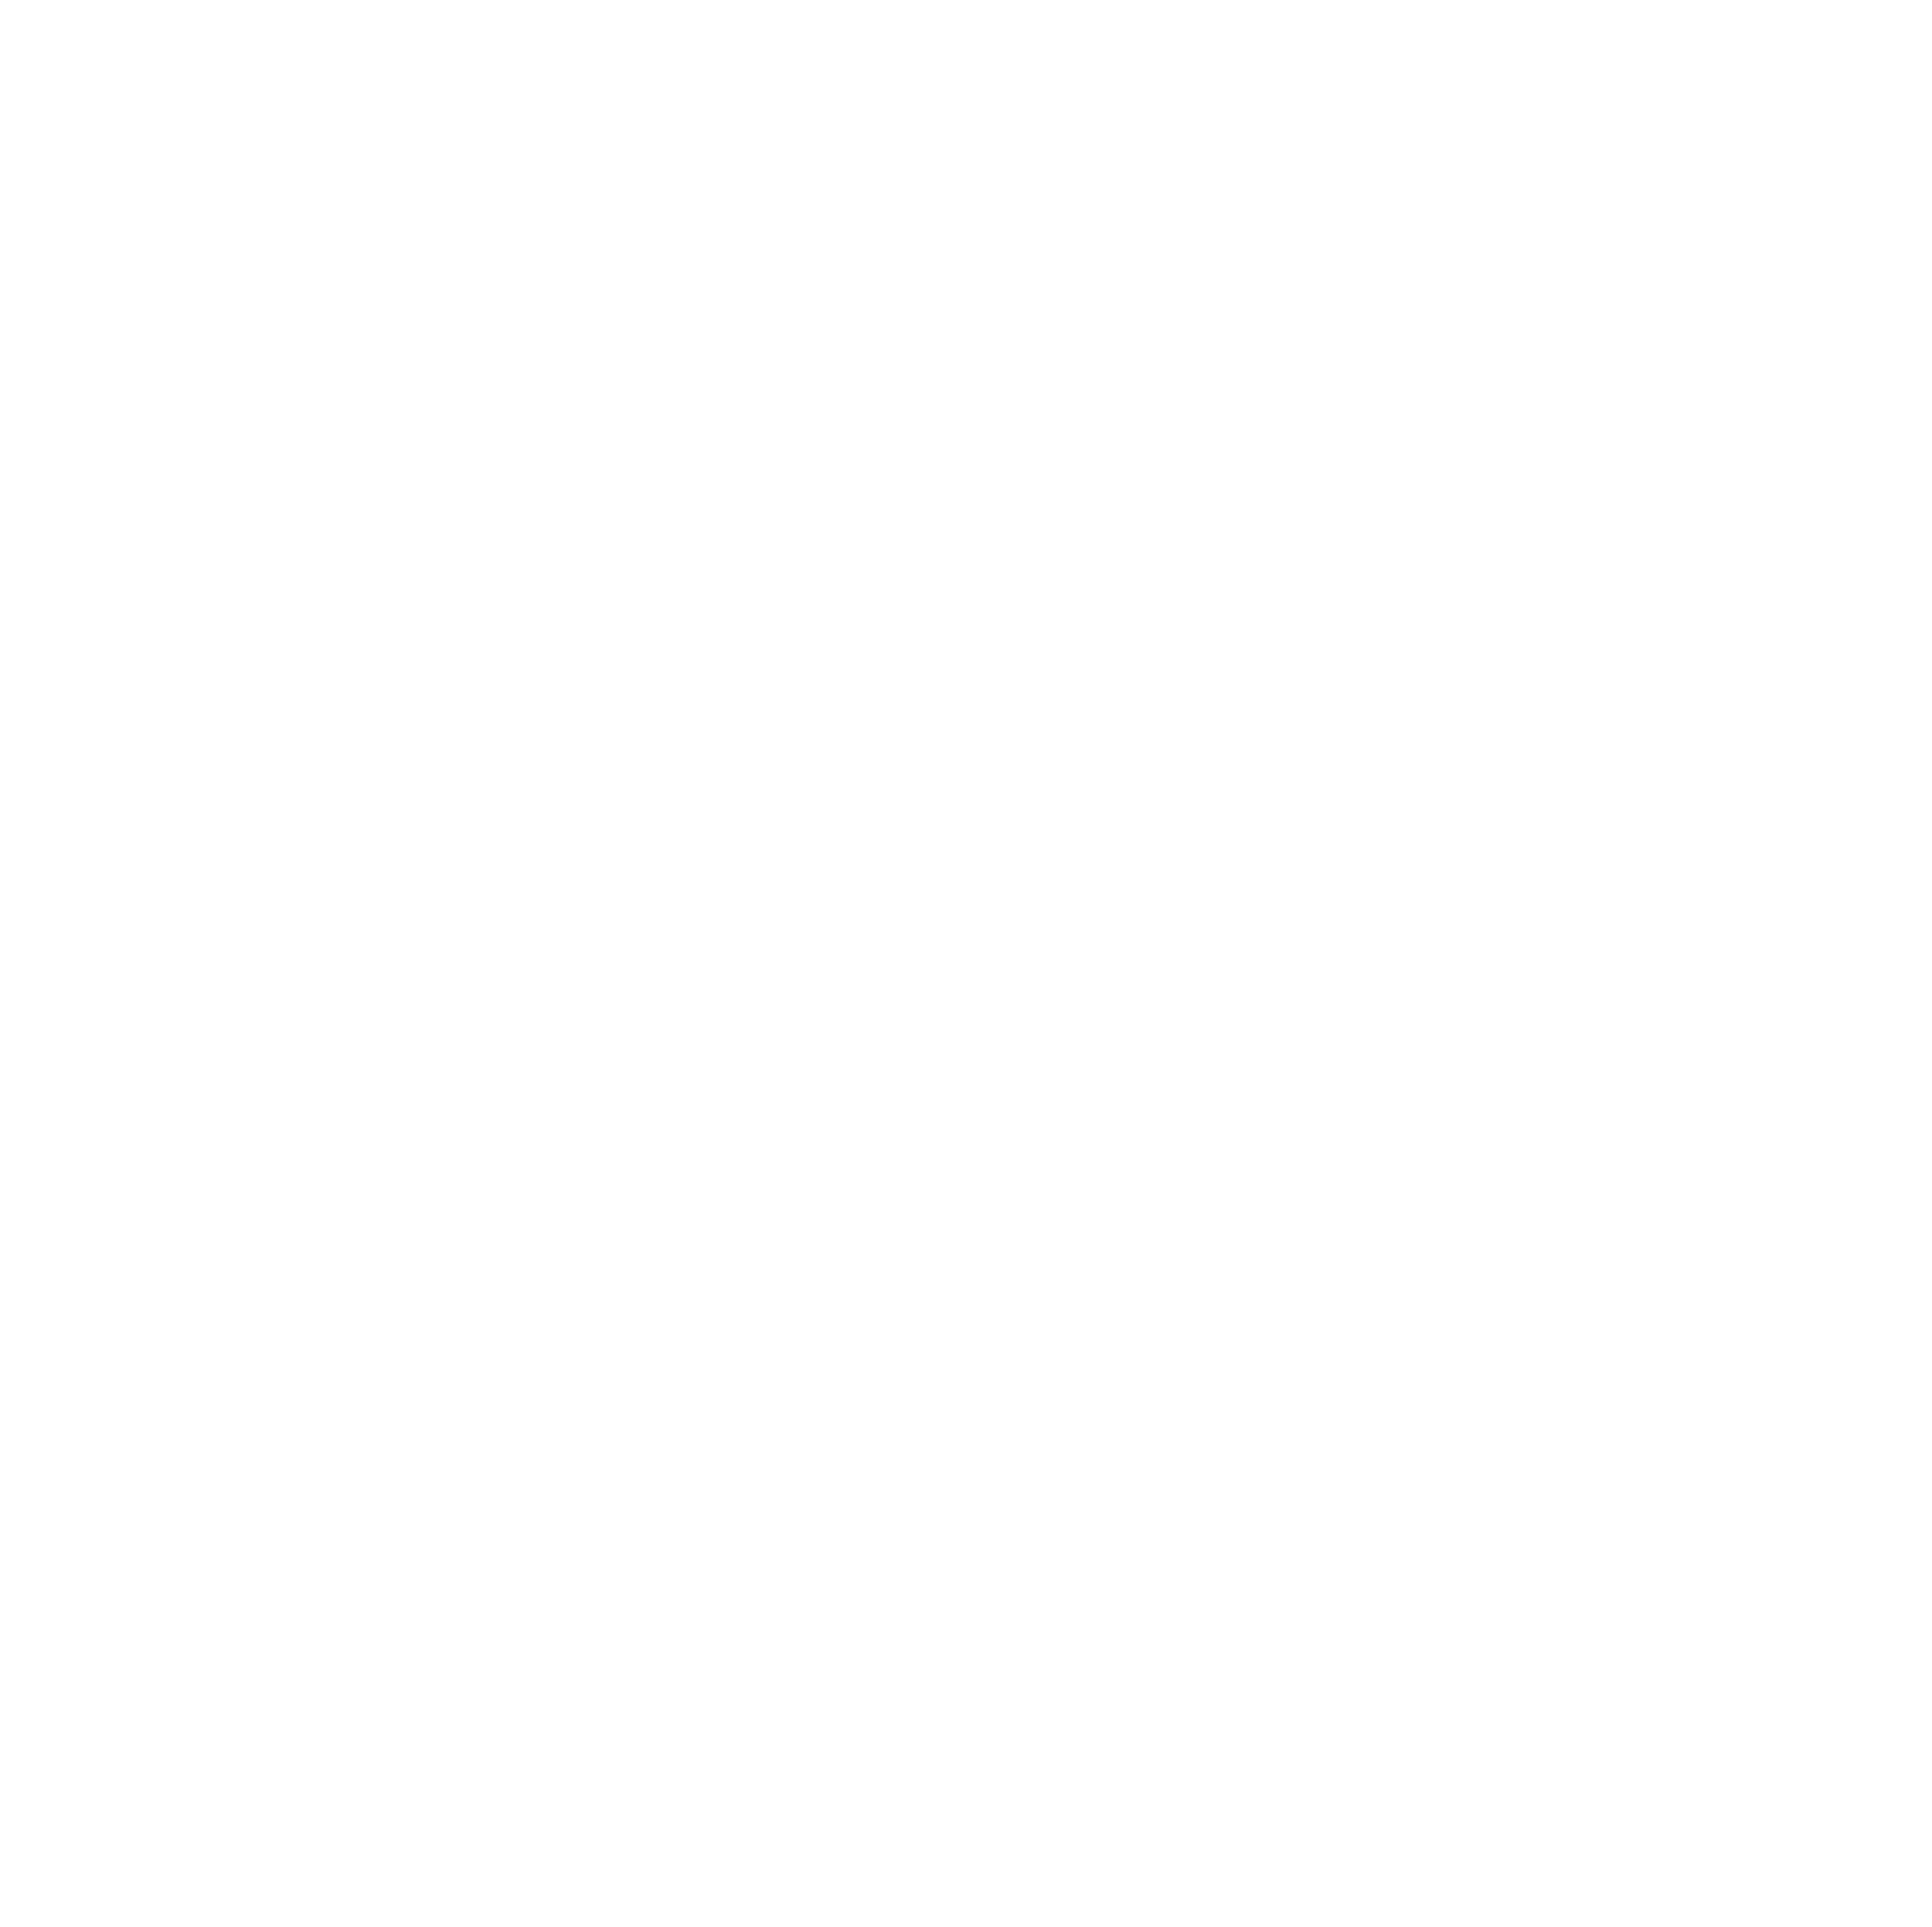 http://www.reslogproject.org/lb/wp-content/uploads/2022/08/New-Reslog-logo-png-white-02.png